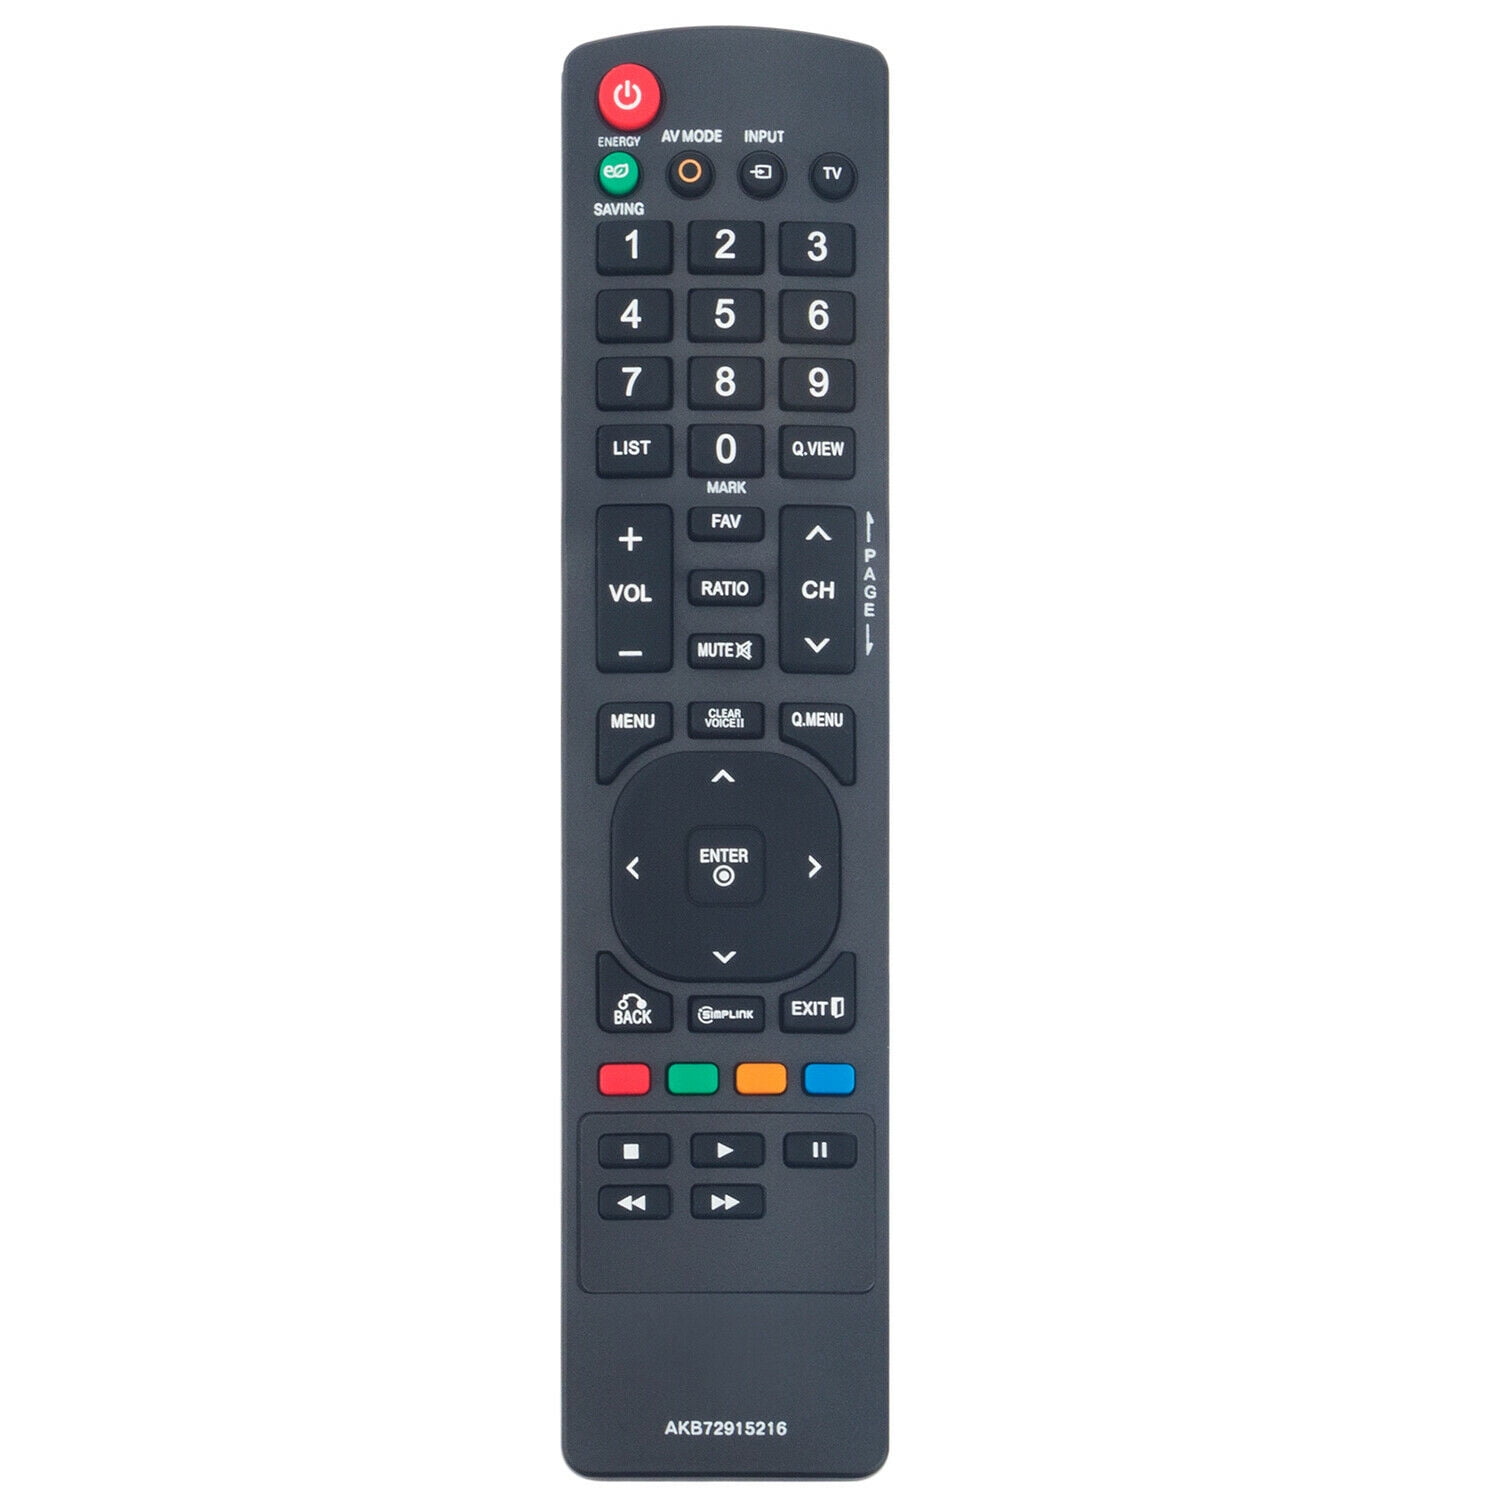 New Remote Control Replace AKB74455416 for LG Smart LED HDTV 43LF5900 49LF5900